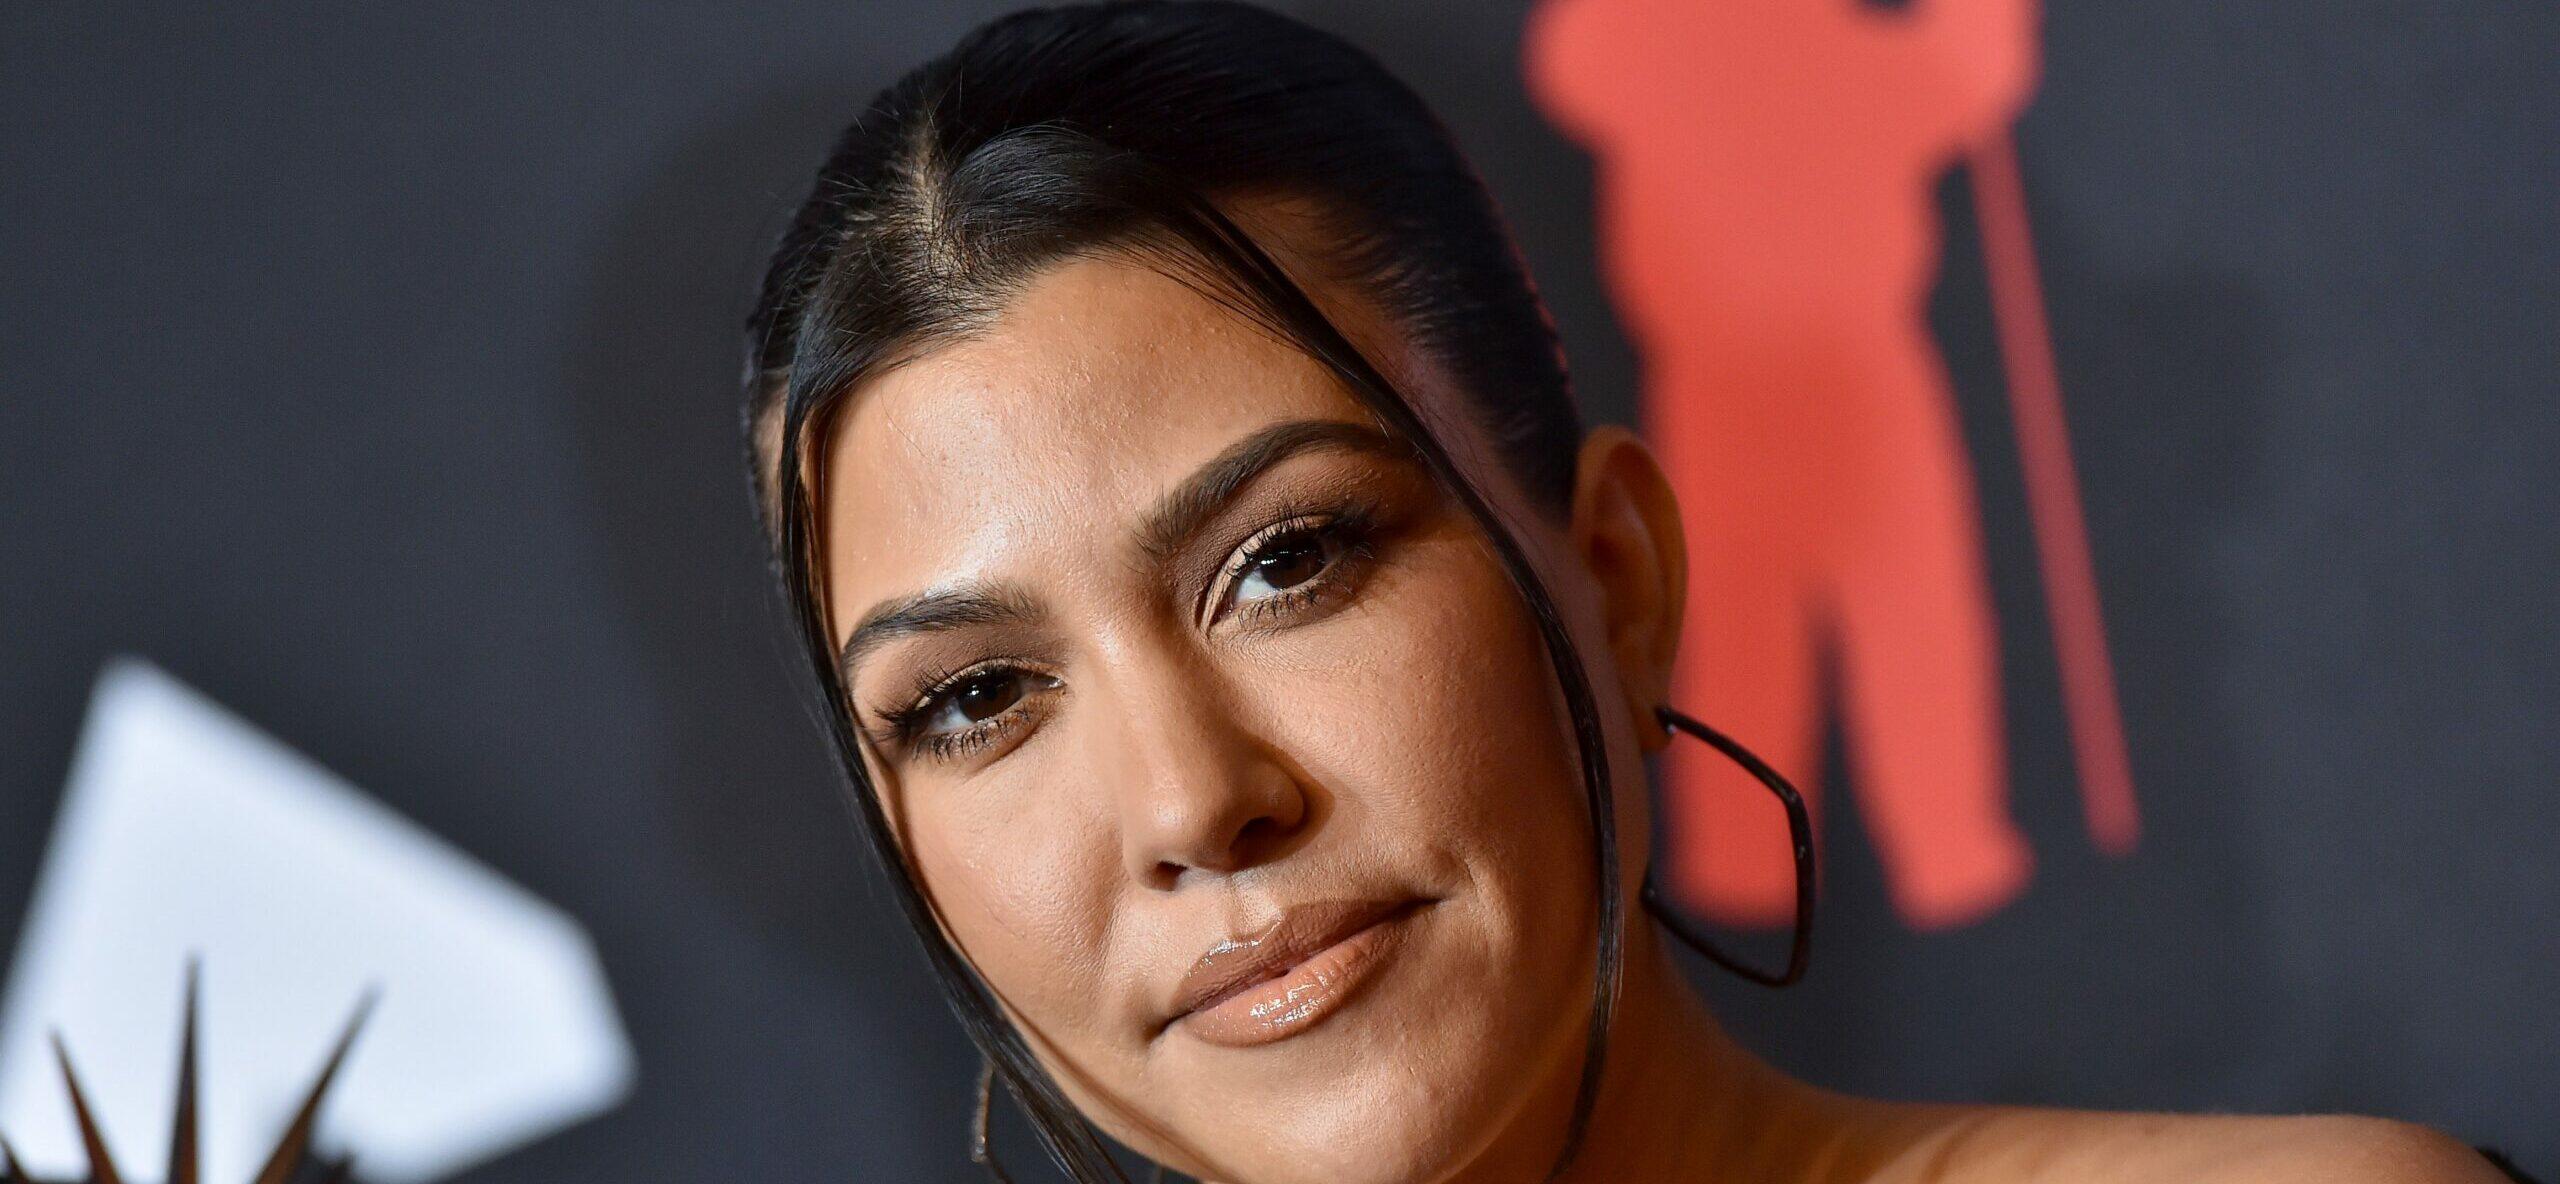 Kourtney Kardashian Goes Blonde, Does THIS When Life Gets Complicated